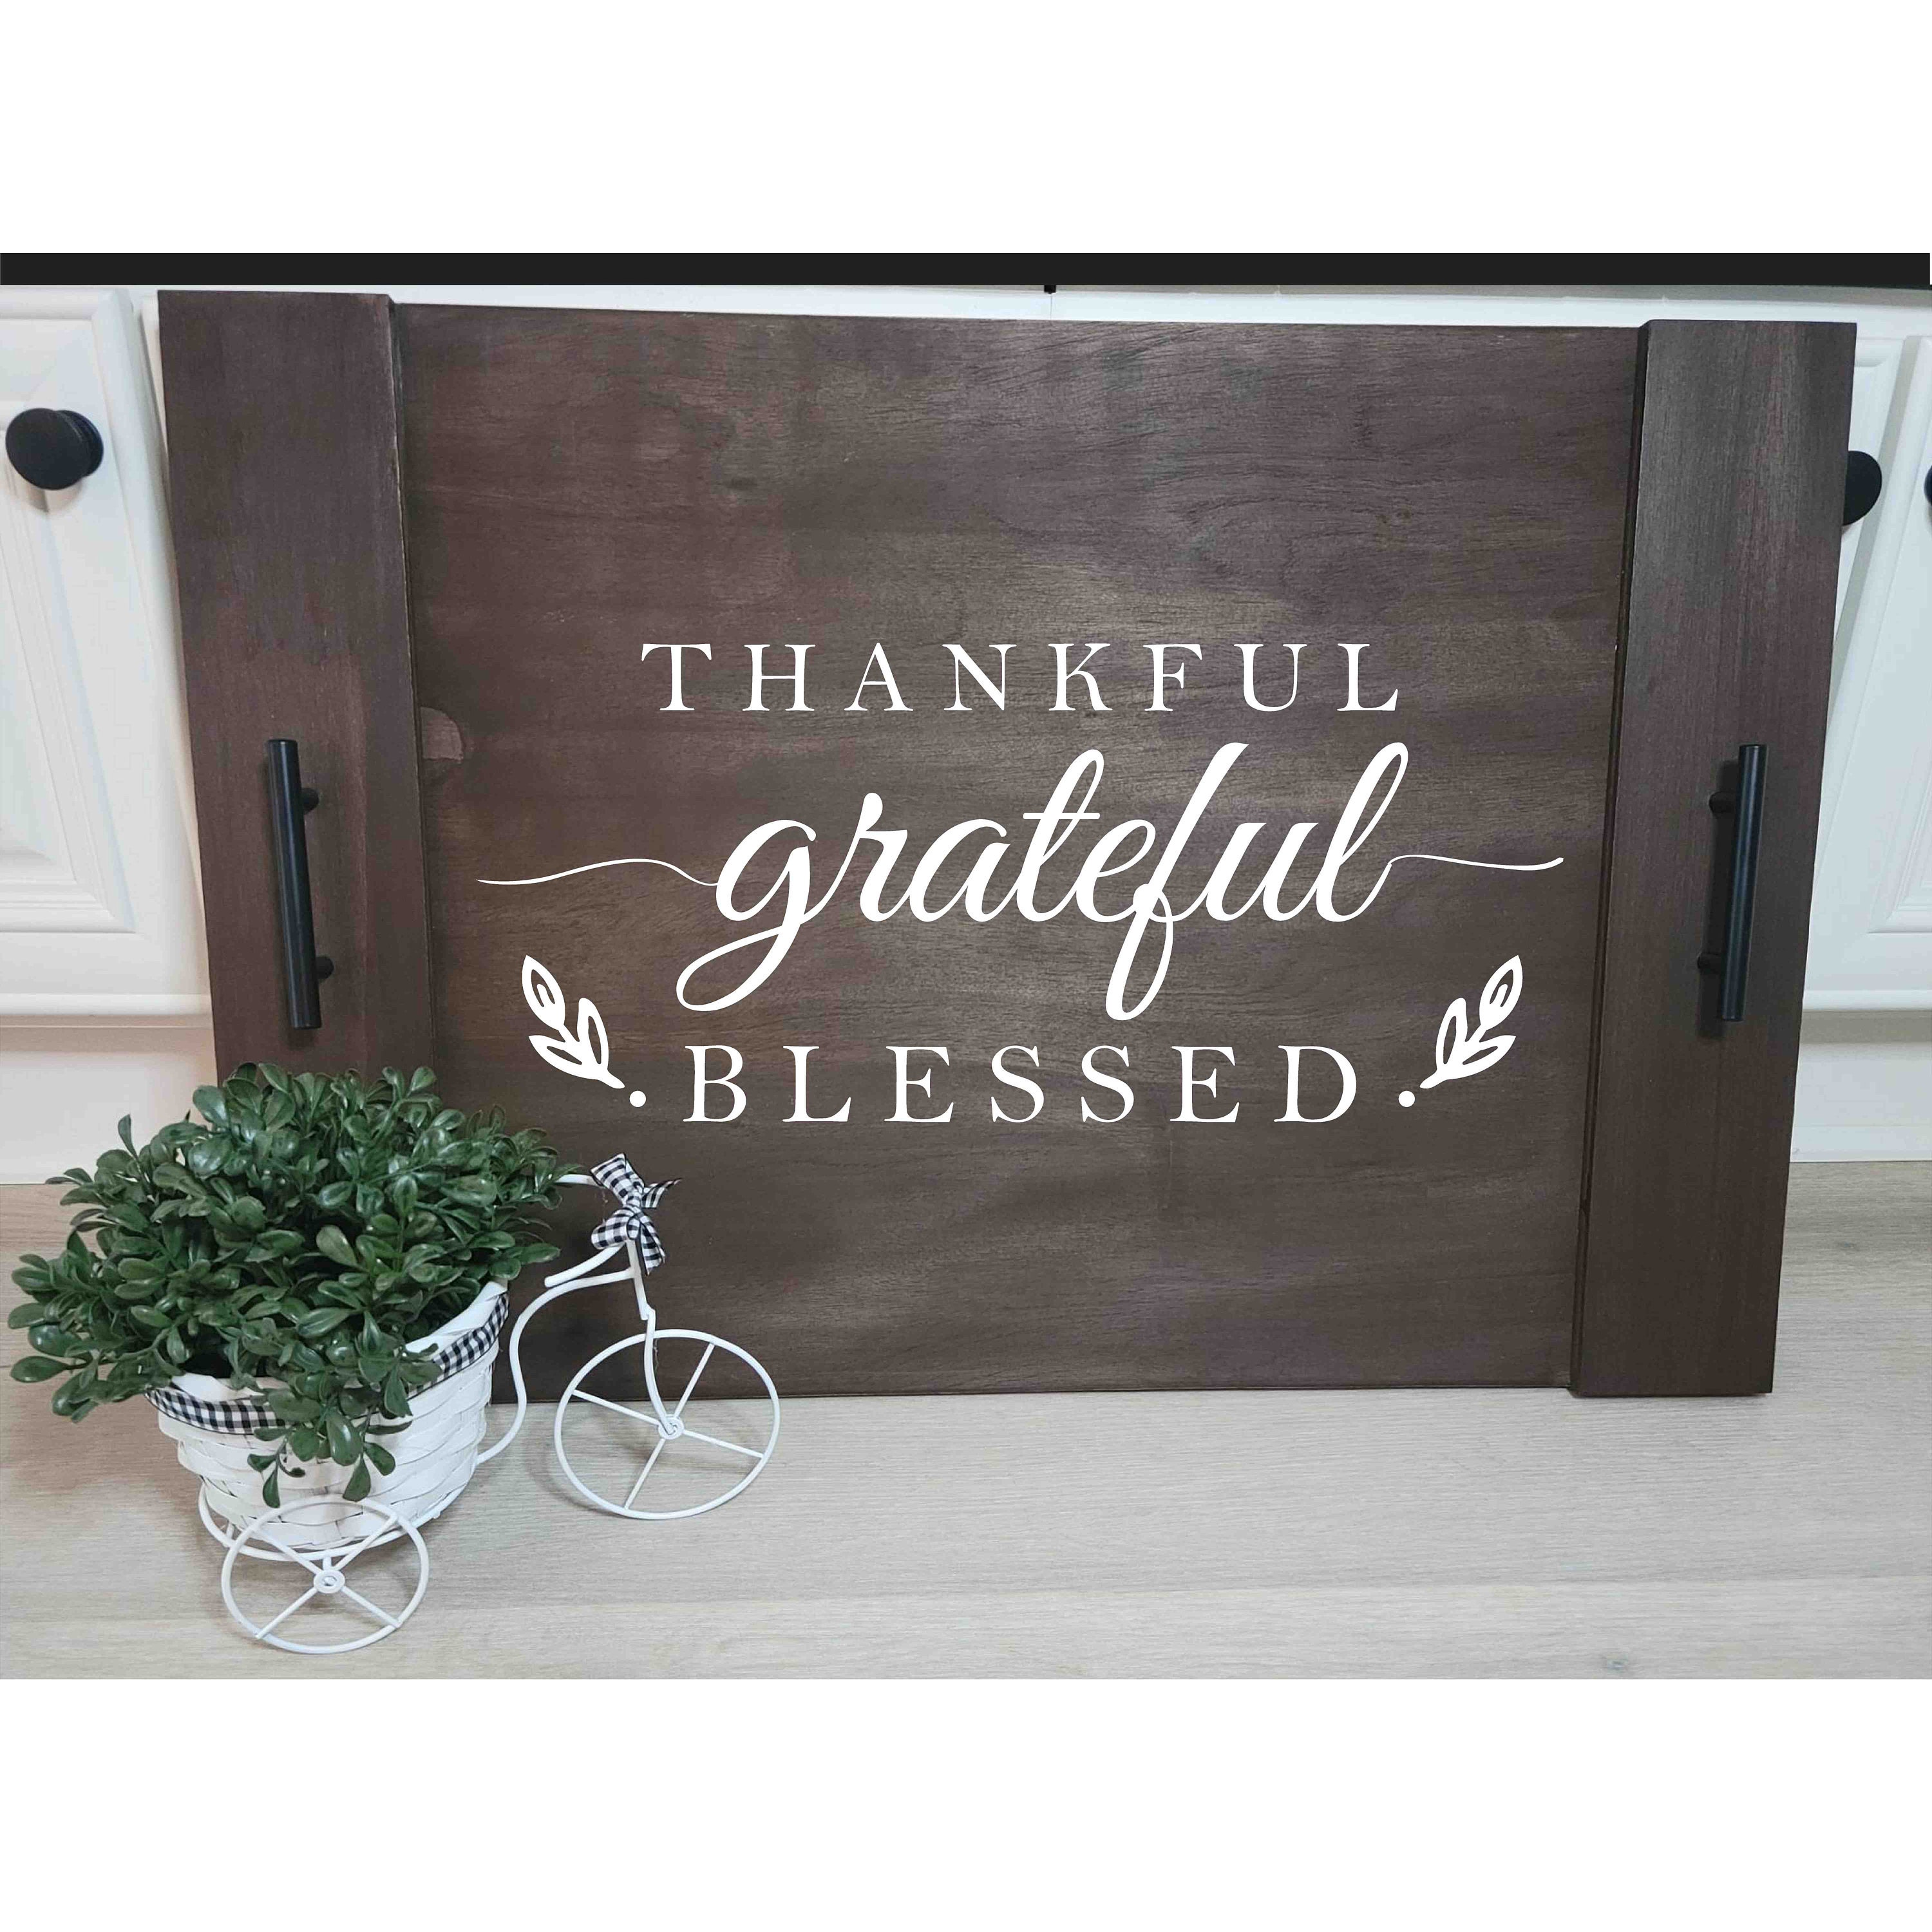 Grateful Thankful And Blessed Wood Engraved Noodle Board - Stove Cover -  Sink Cover - With Handles - Gas or Electric Stove NB-G2